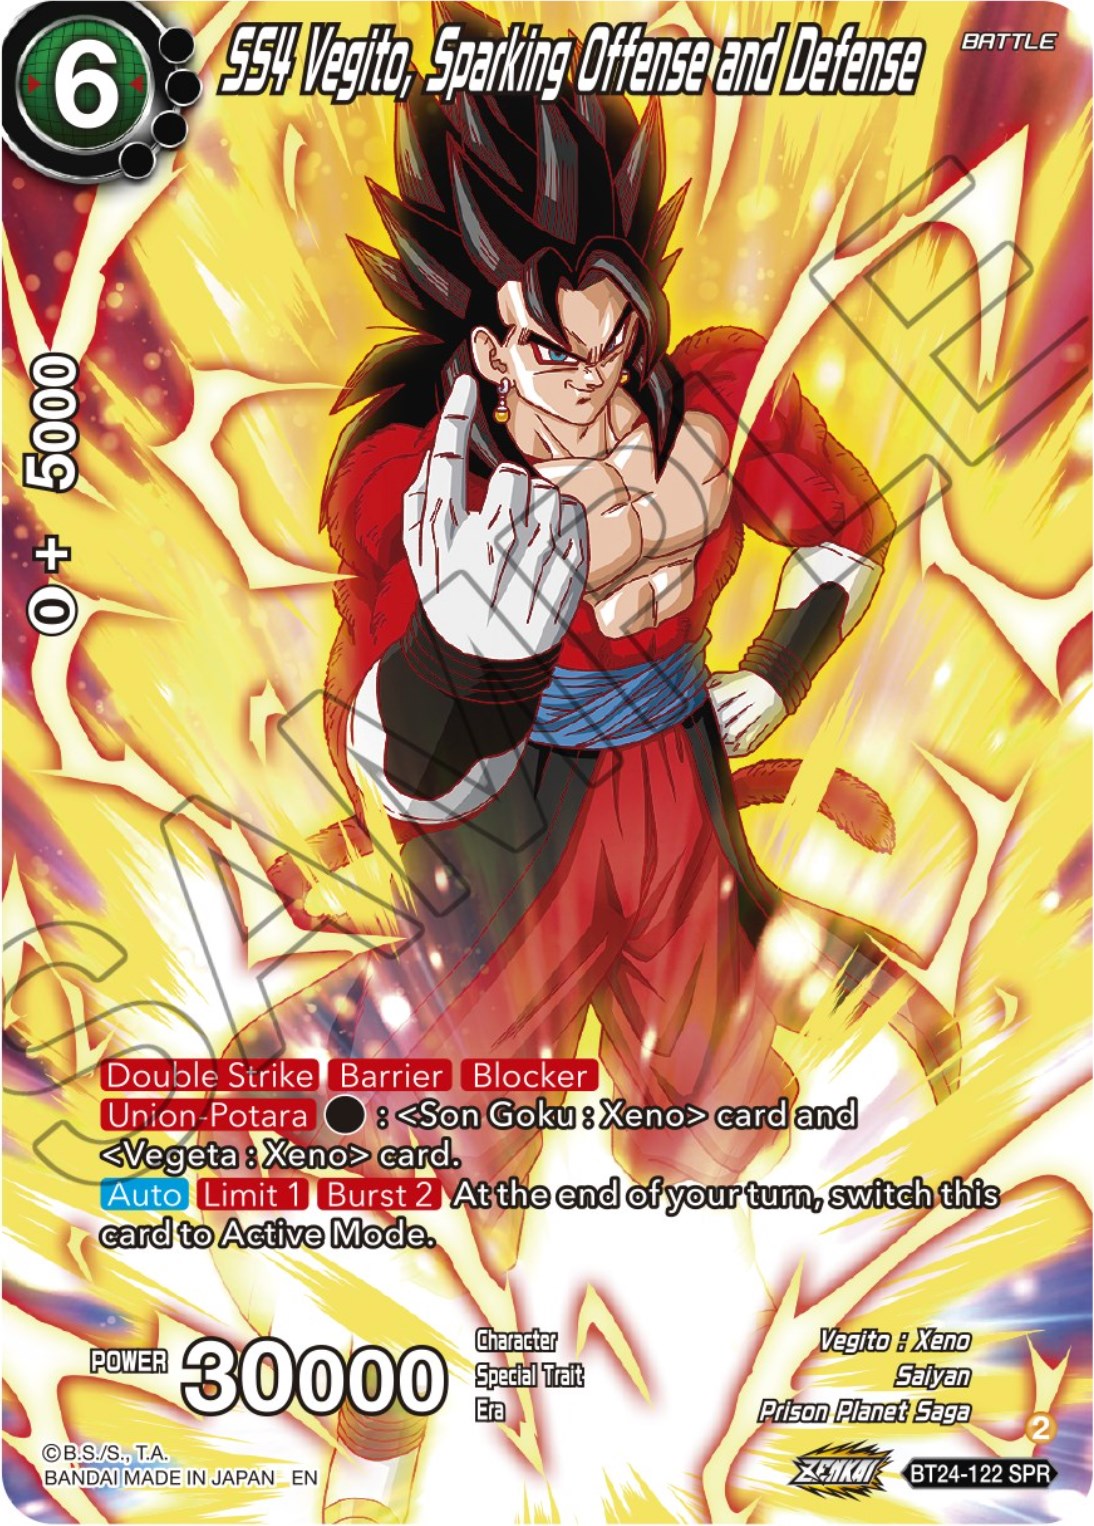 SS4 Vegito, Sparking Offense and Defense (SPR) (BT24-122) [Beyond Generations] | North Valley Games